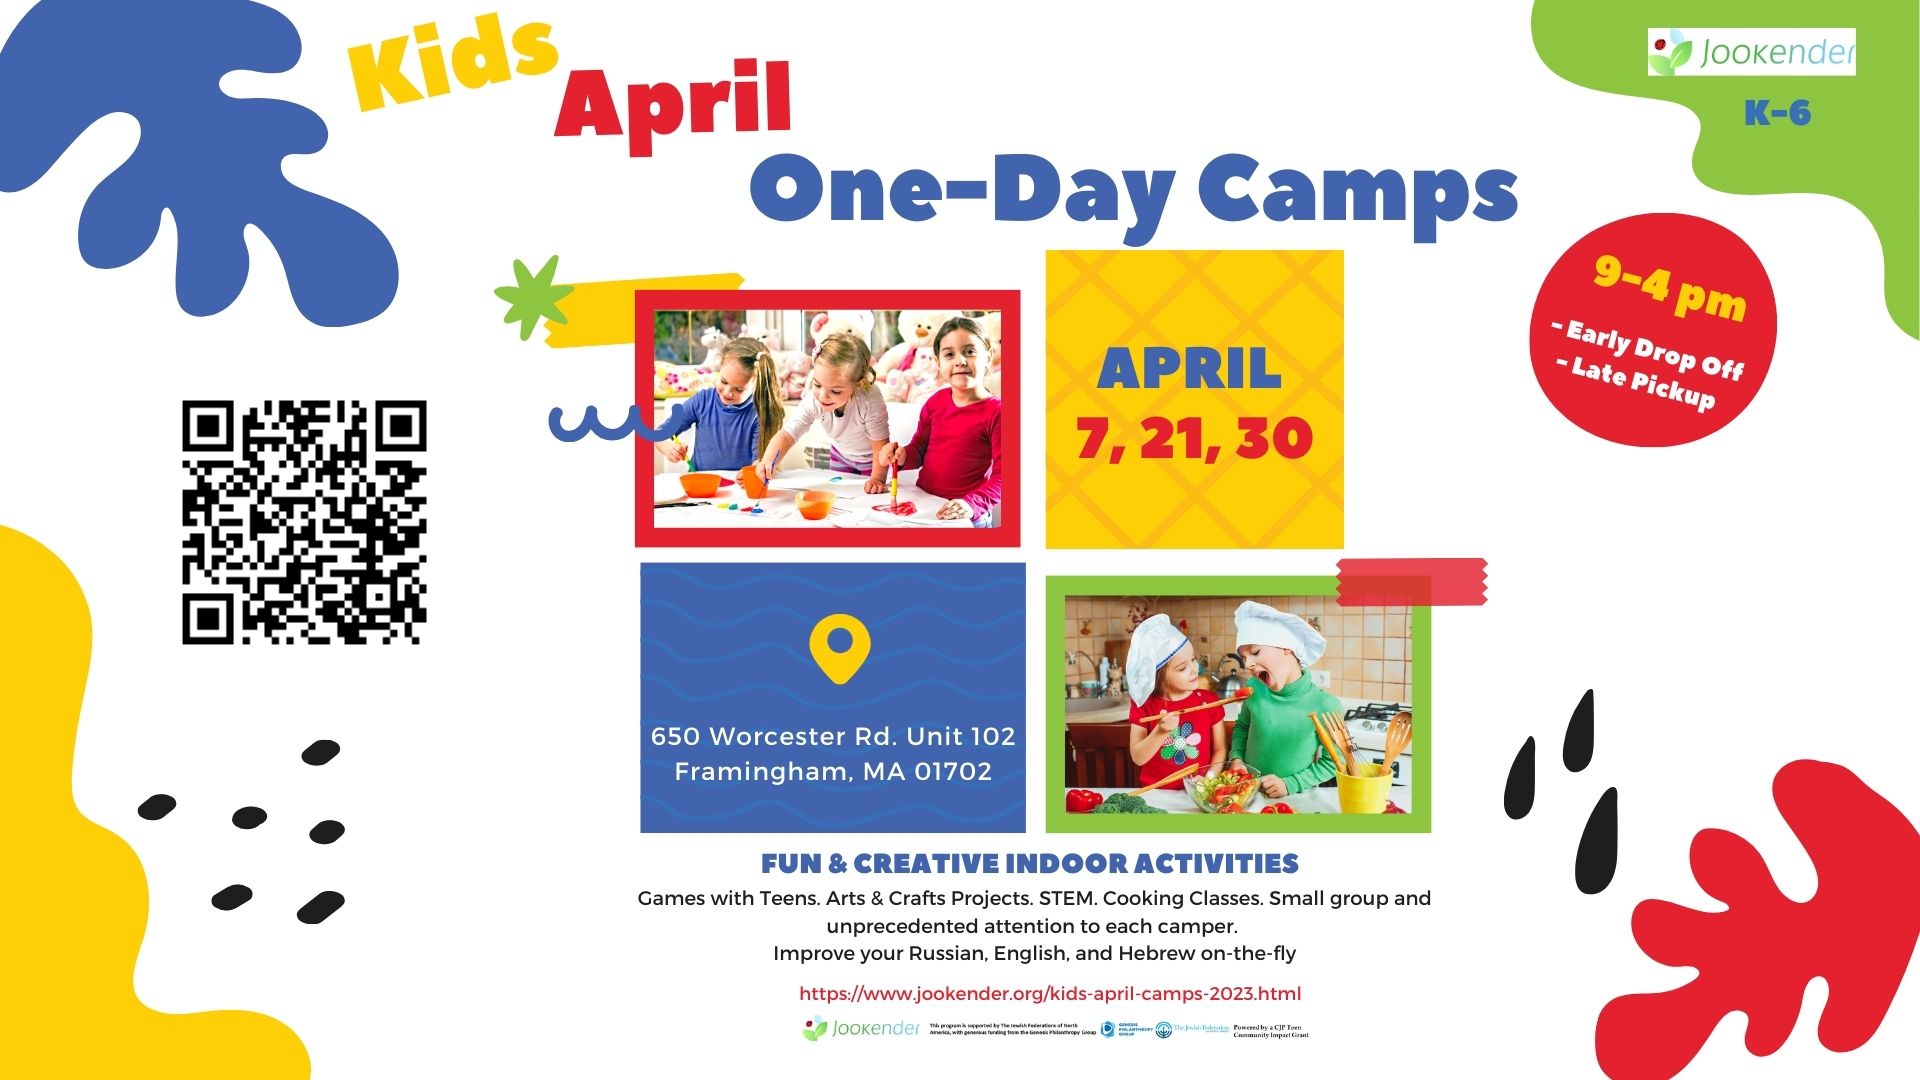 Kids April One-Day Camps